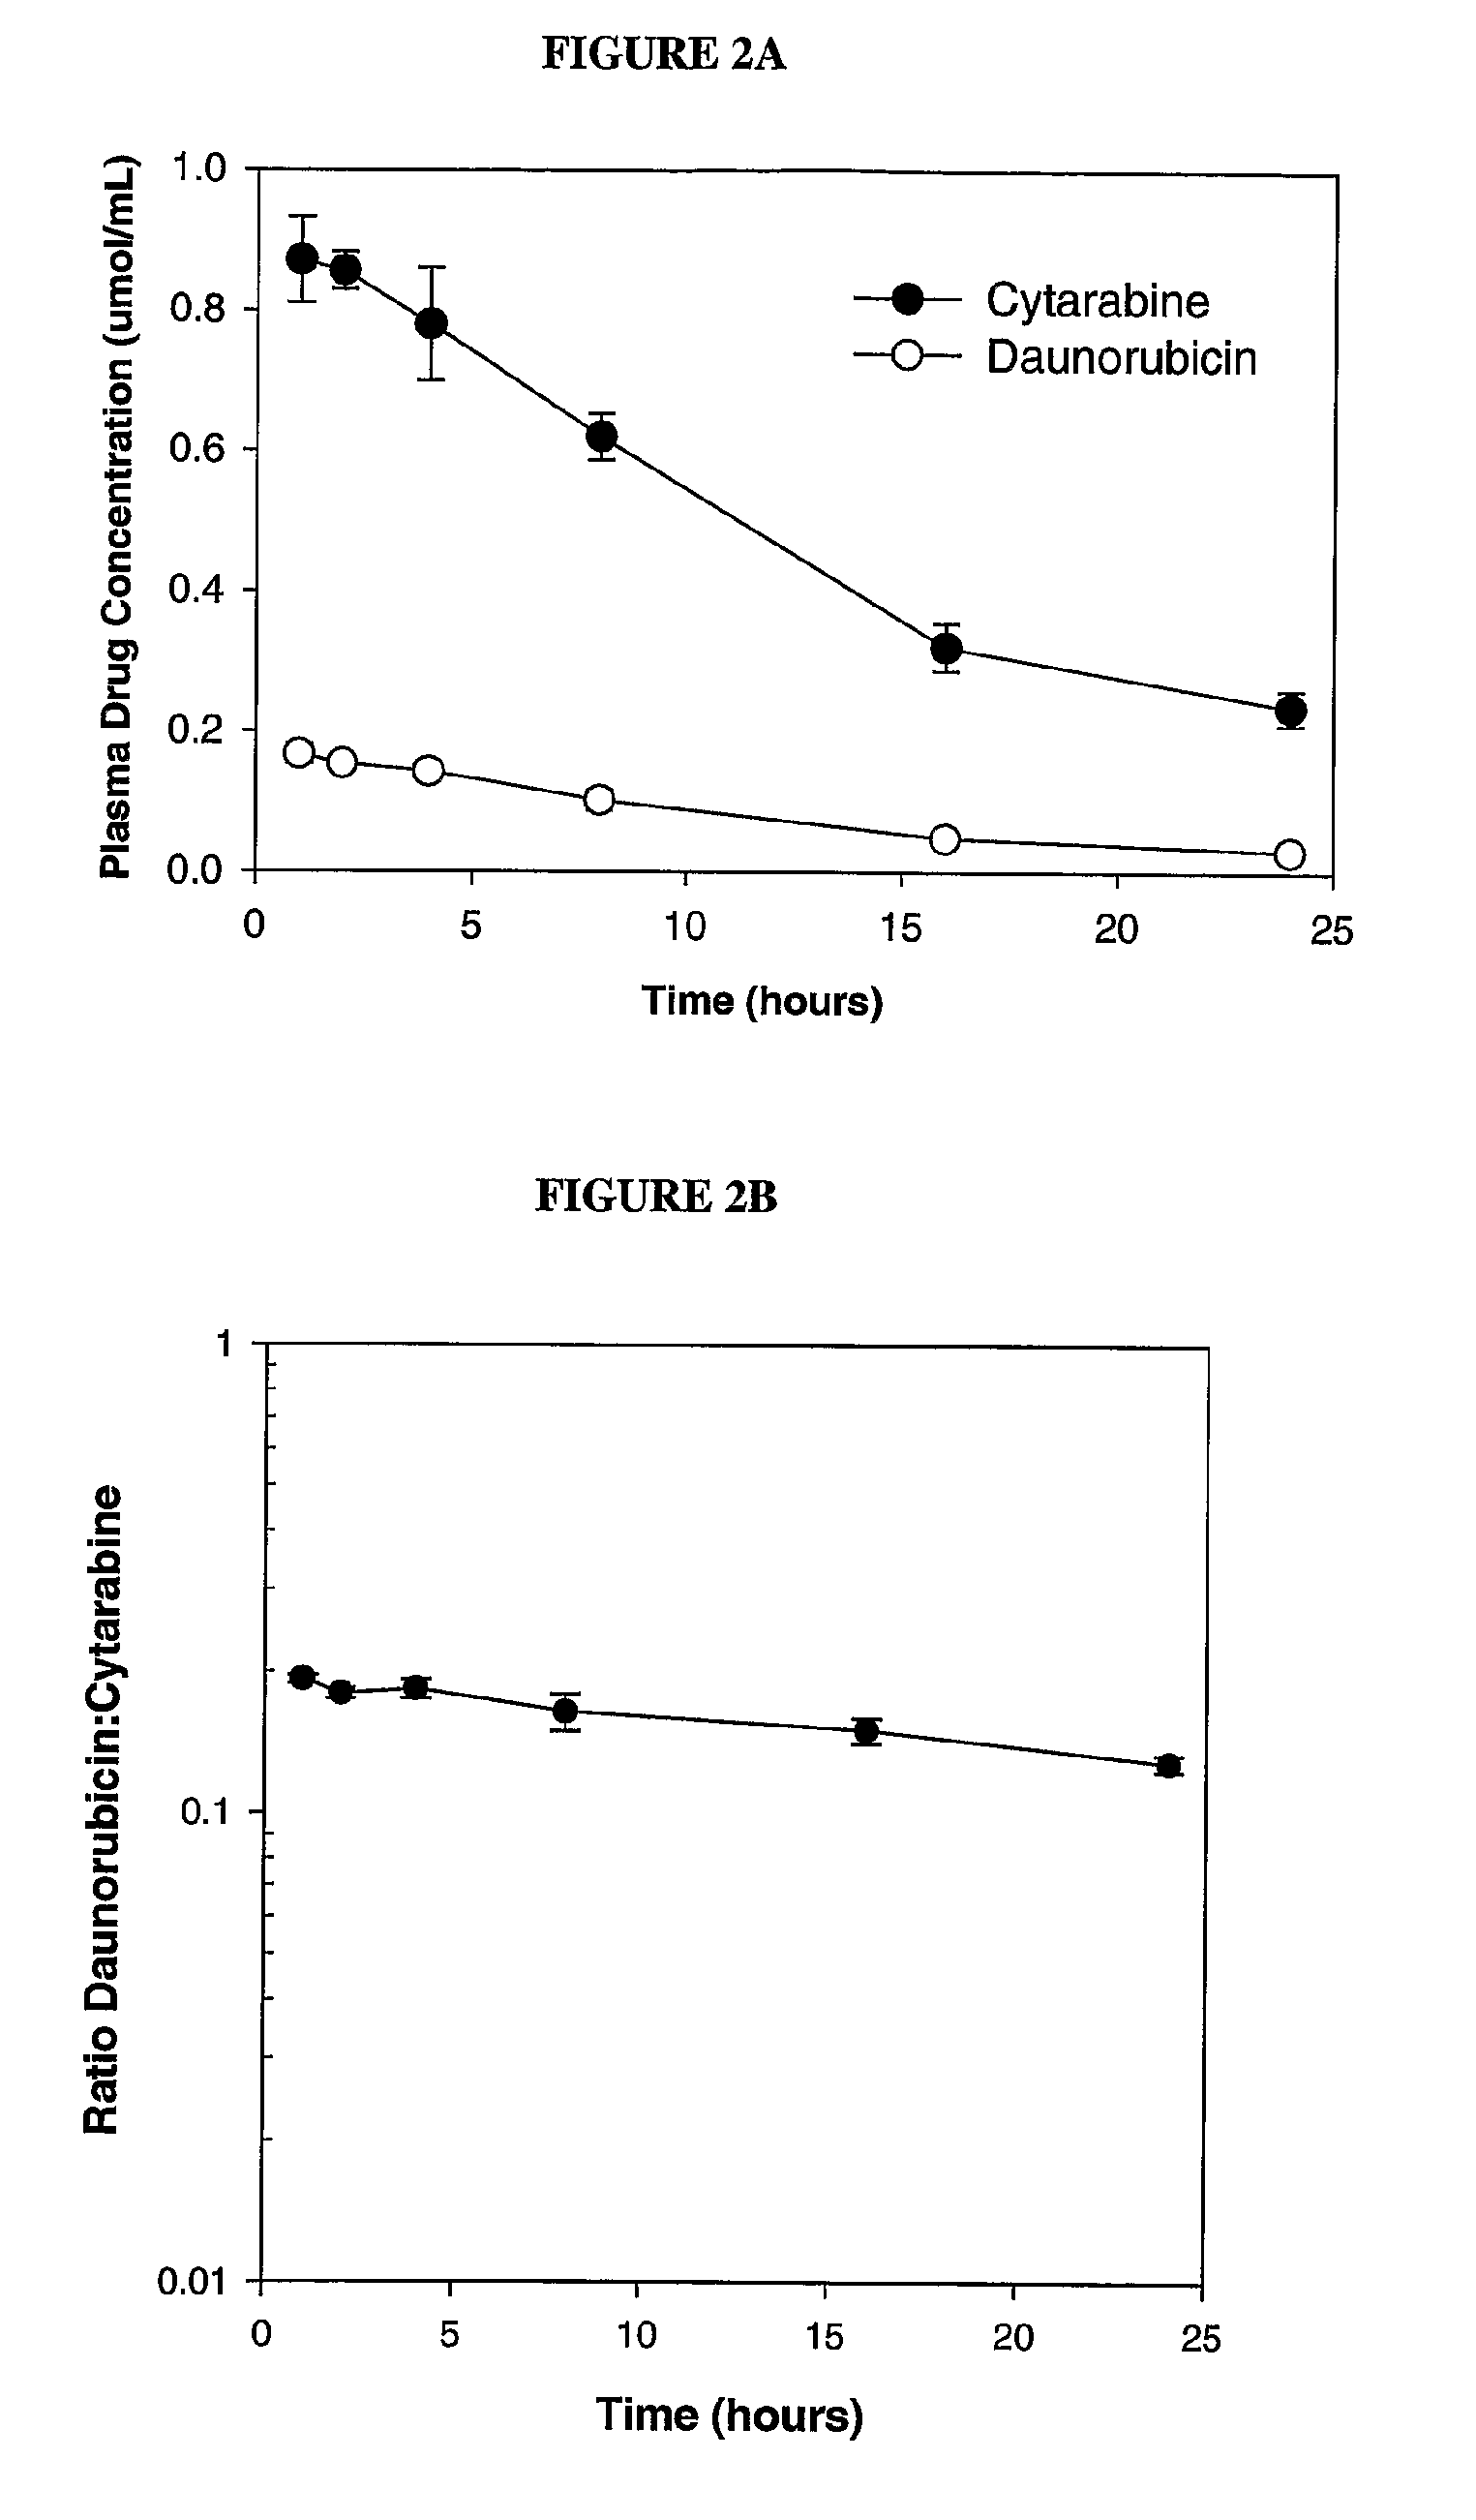 Liposomal formulations of anthracycline agents and cytidine analogs